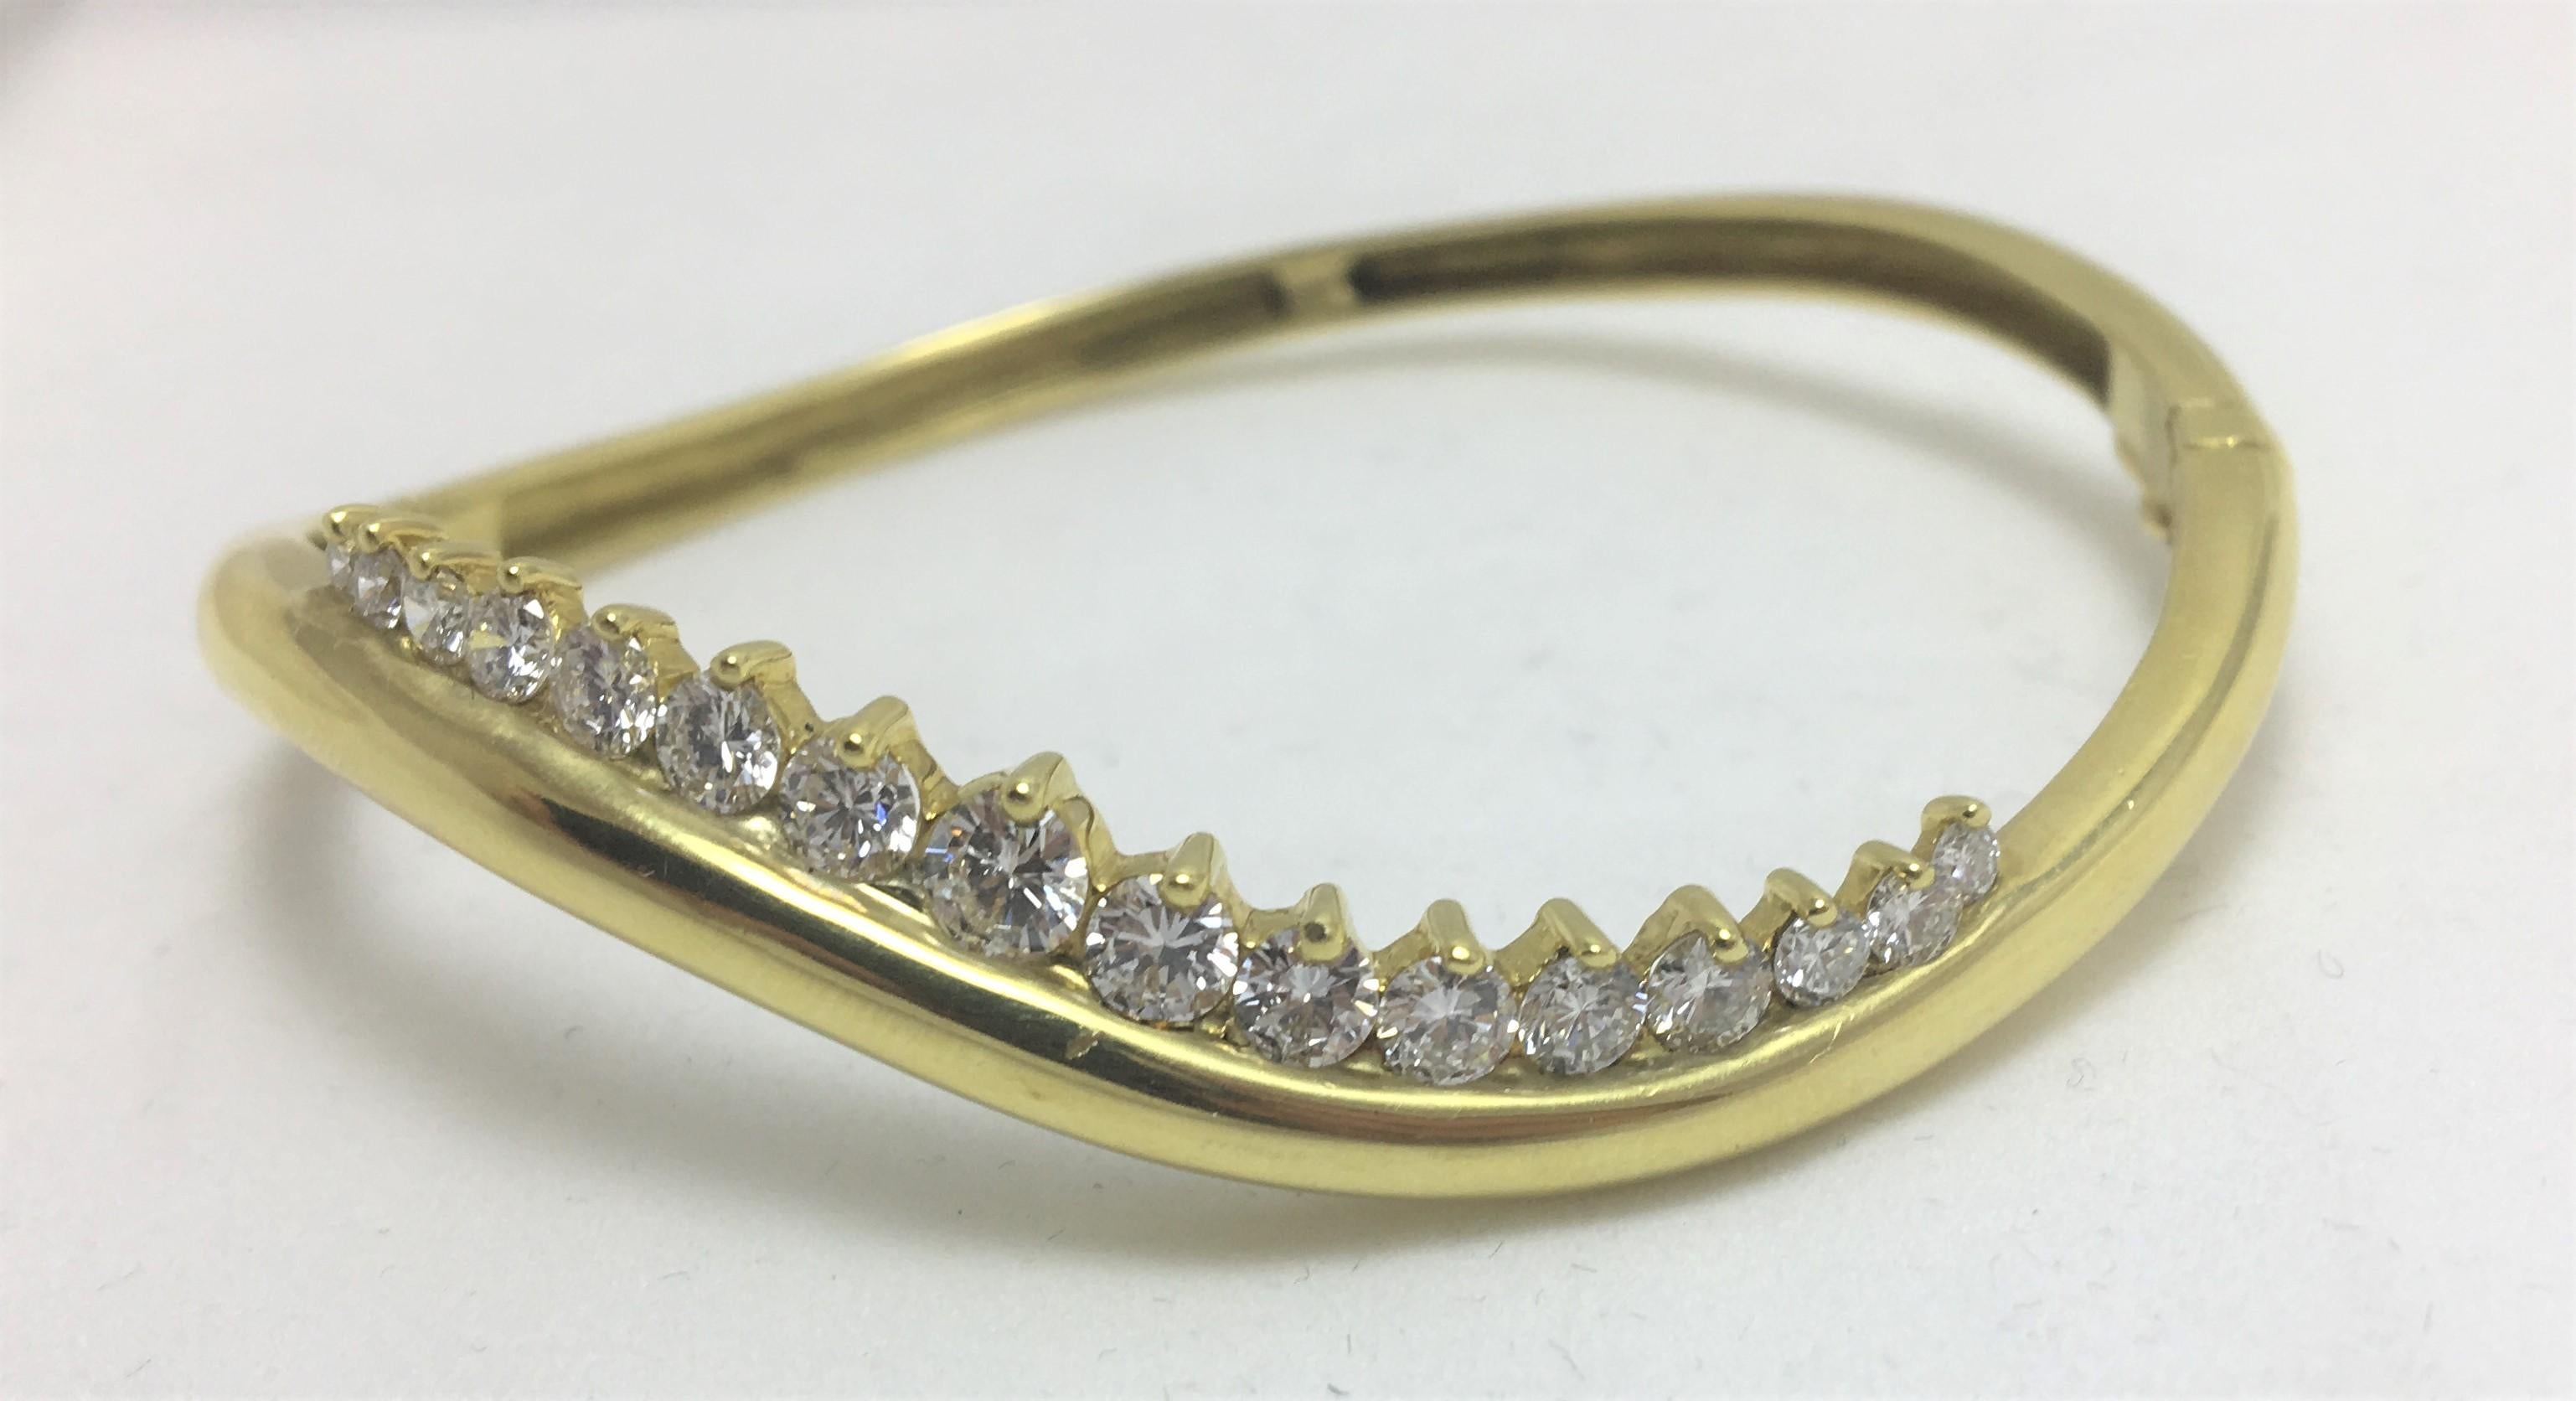 This bracelet is a unique 18K yellow gold 'wave' design with 16 diamonds
Honora Jewelry Co. Designer
1.77 total diamond weight
16 round diamonds ranging from approximately .12 carat to .01 carat, F-G color, VS clarity
18 Karat yellow gold 